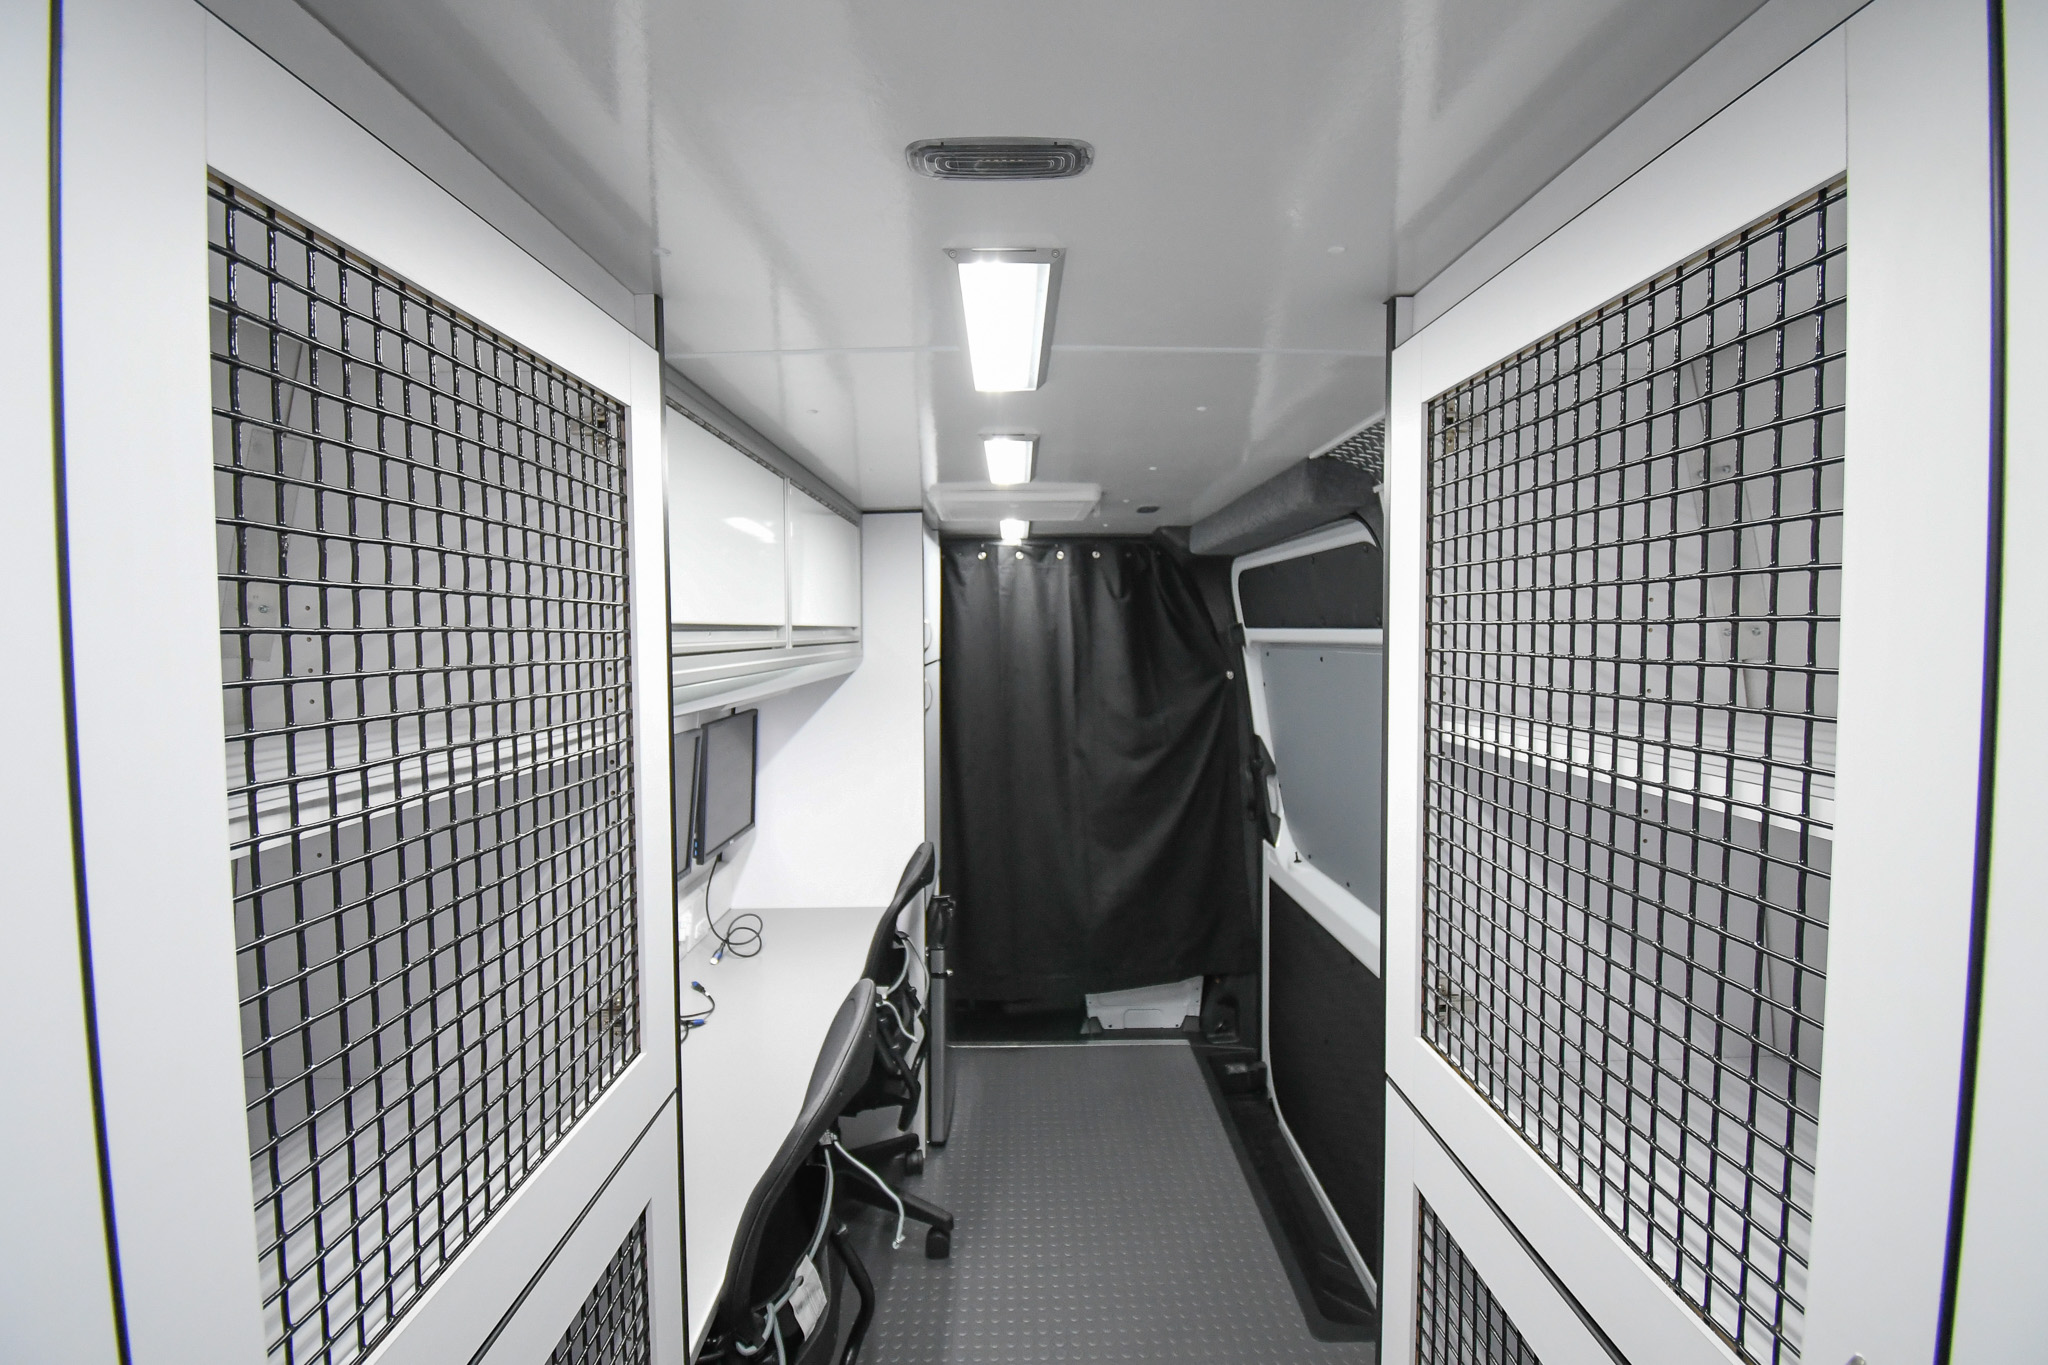 A back-to-front view inside the unit for Johnstown, PA.